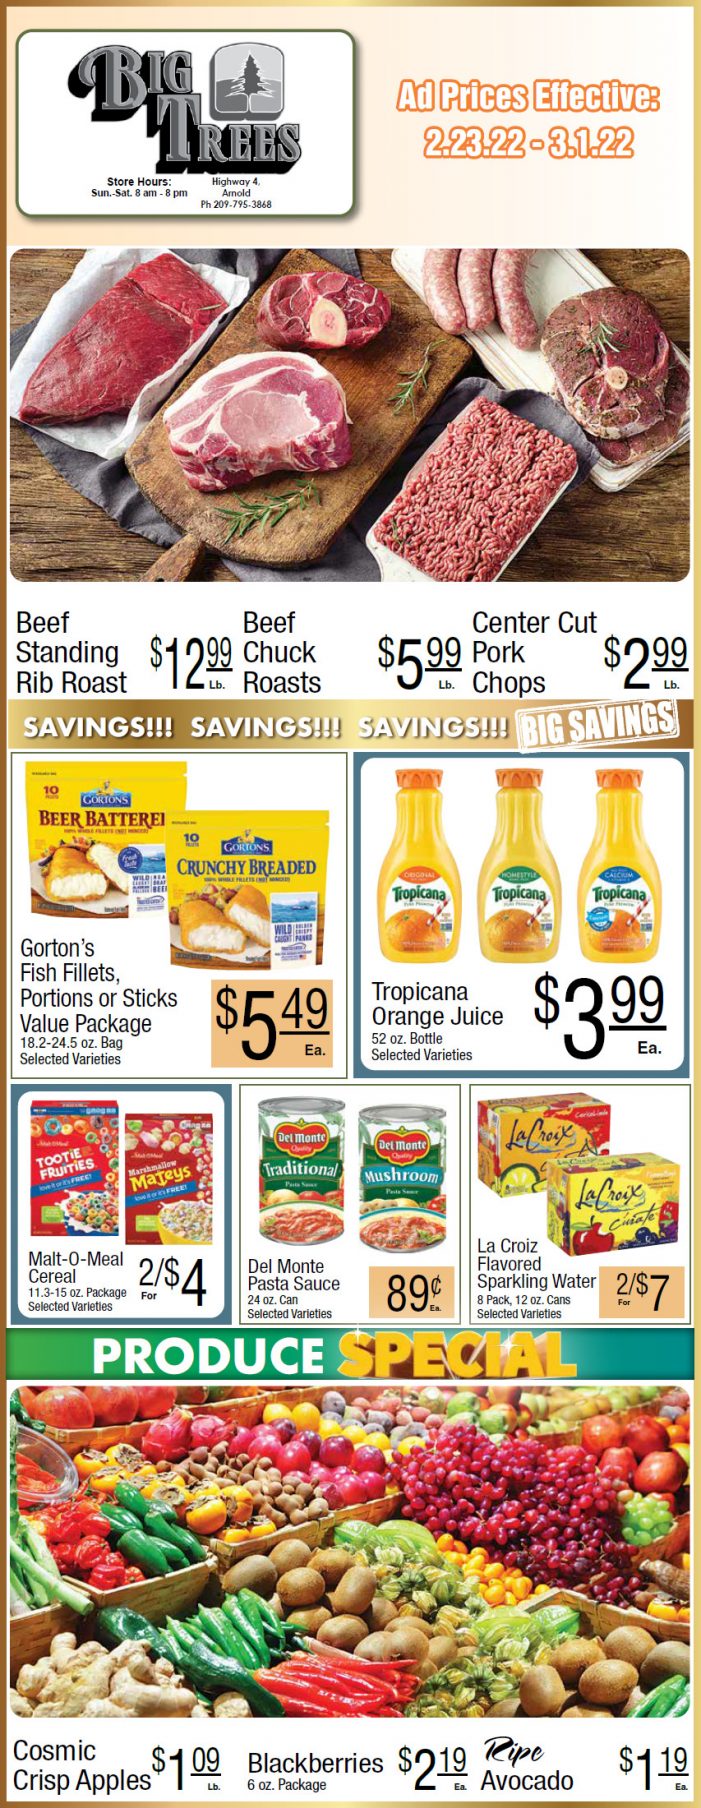 Big Trees Market Weekly Ad & Grocery Specials February 23rd Through March 1st! Shop Local & Save!